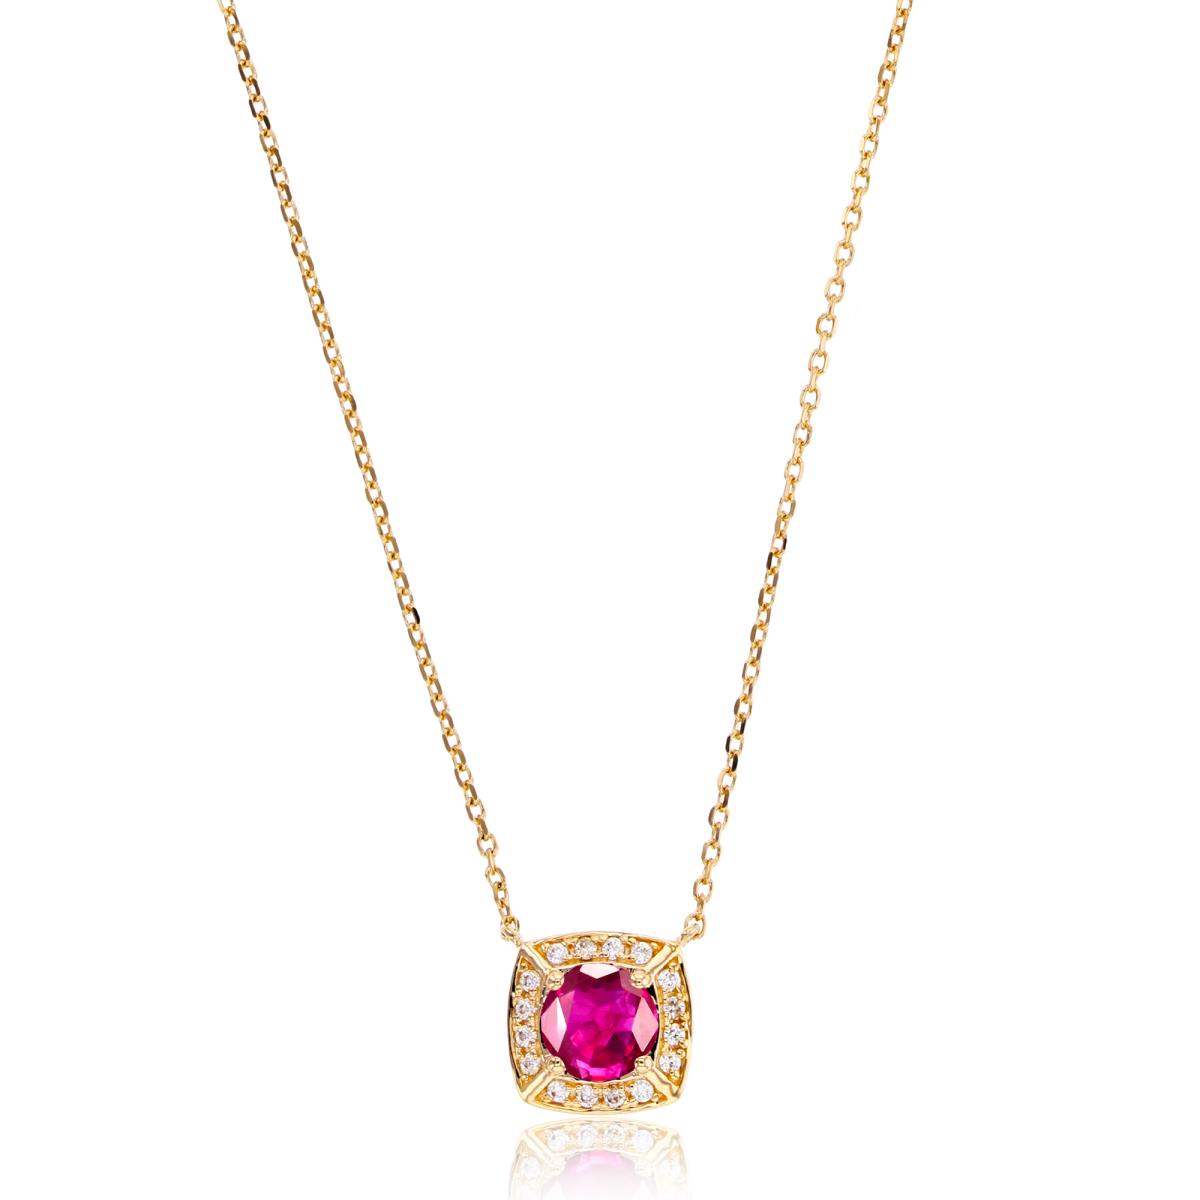 14K Yellow Gold 0.08 CTTW Rd Diamond & 5mm Rd Ruby Cushion 18" Necklace